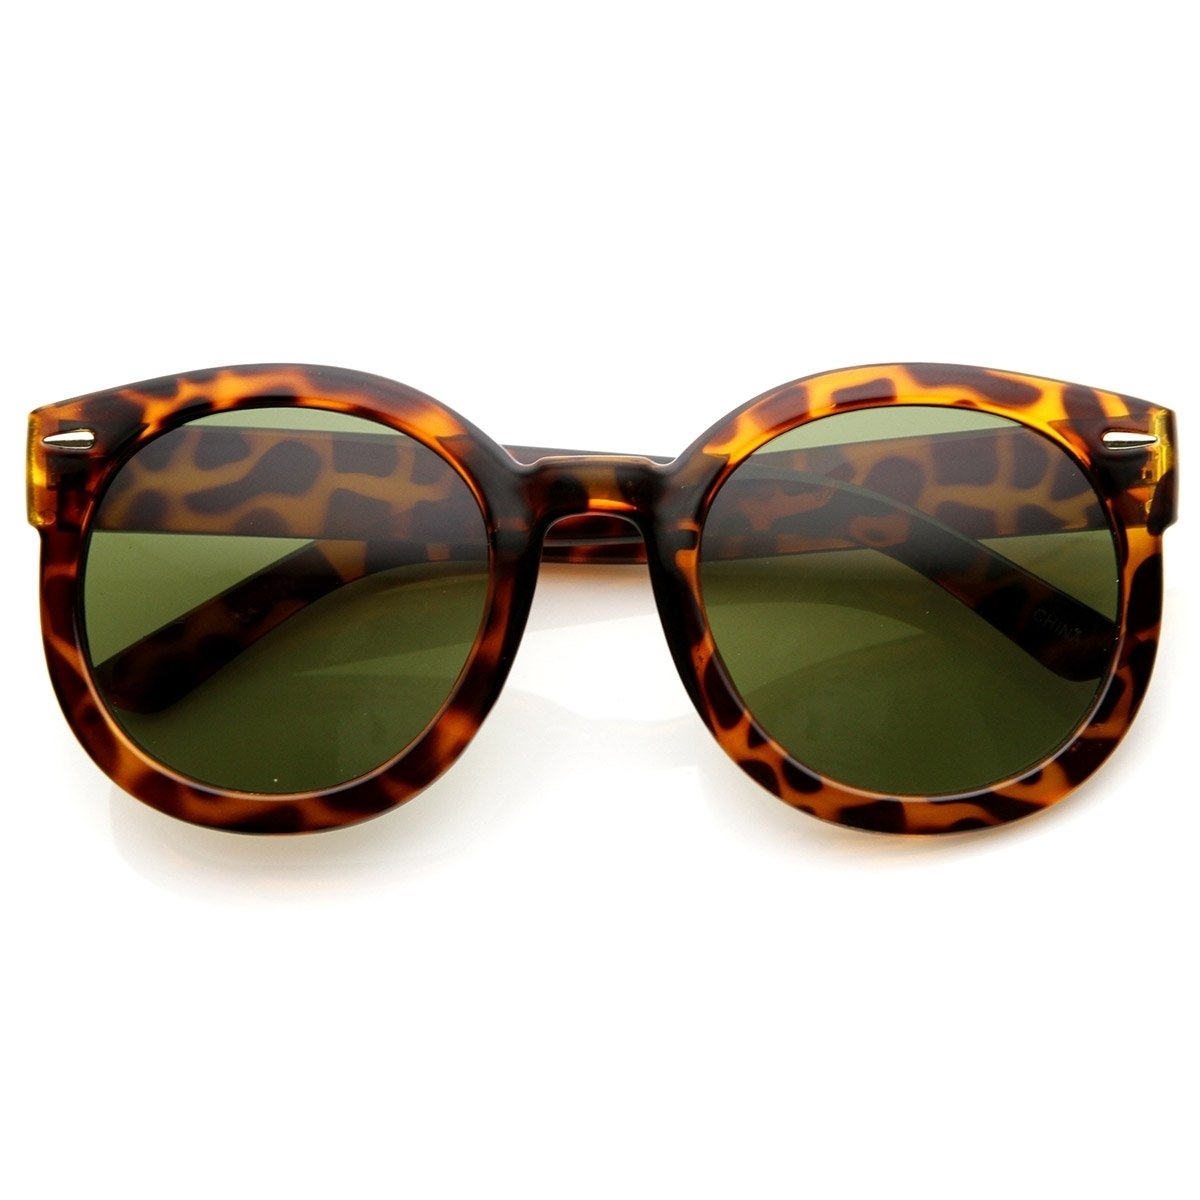 Womens Plastic Sunglasses Oversized Retro Style With Metal Rivets - Nude